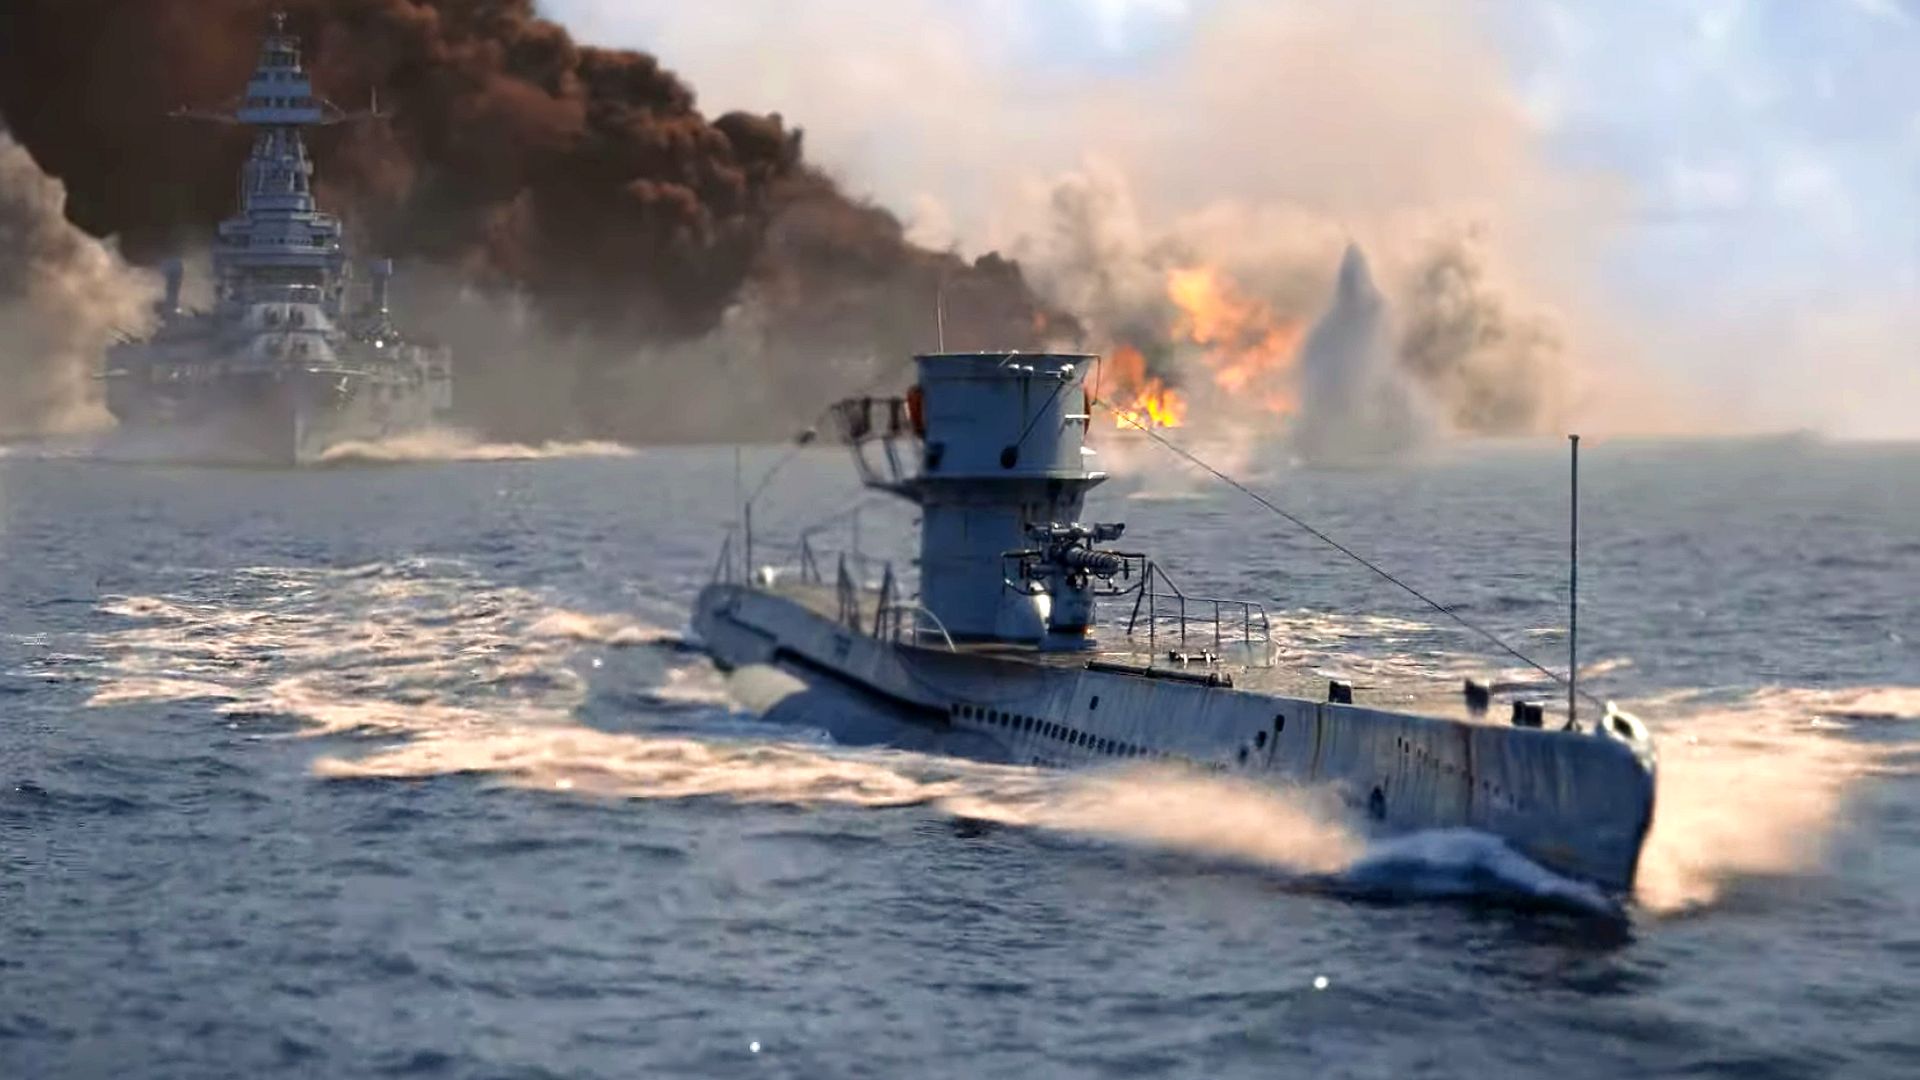 Best free MMOs: Explosions in the sea as ships fight in World of Warships